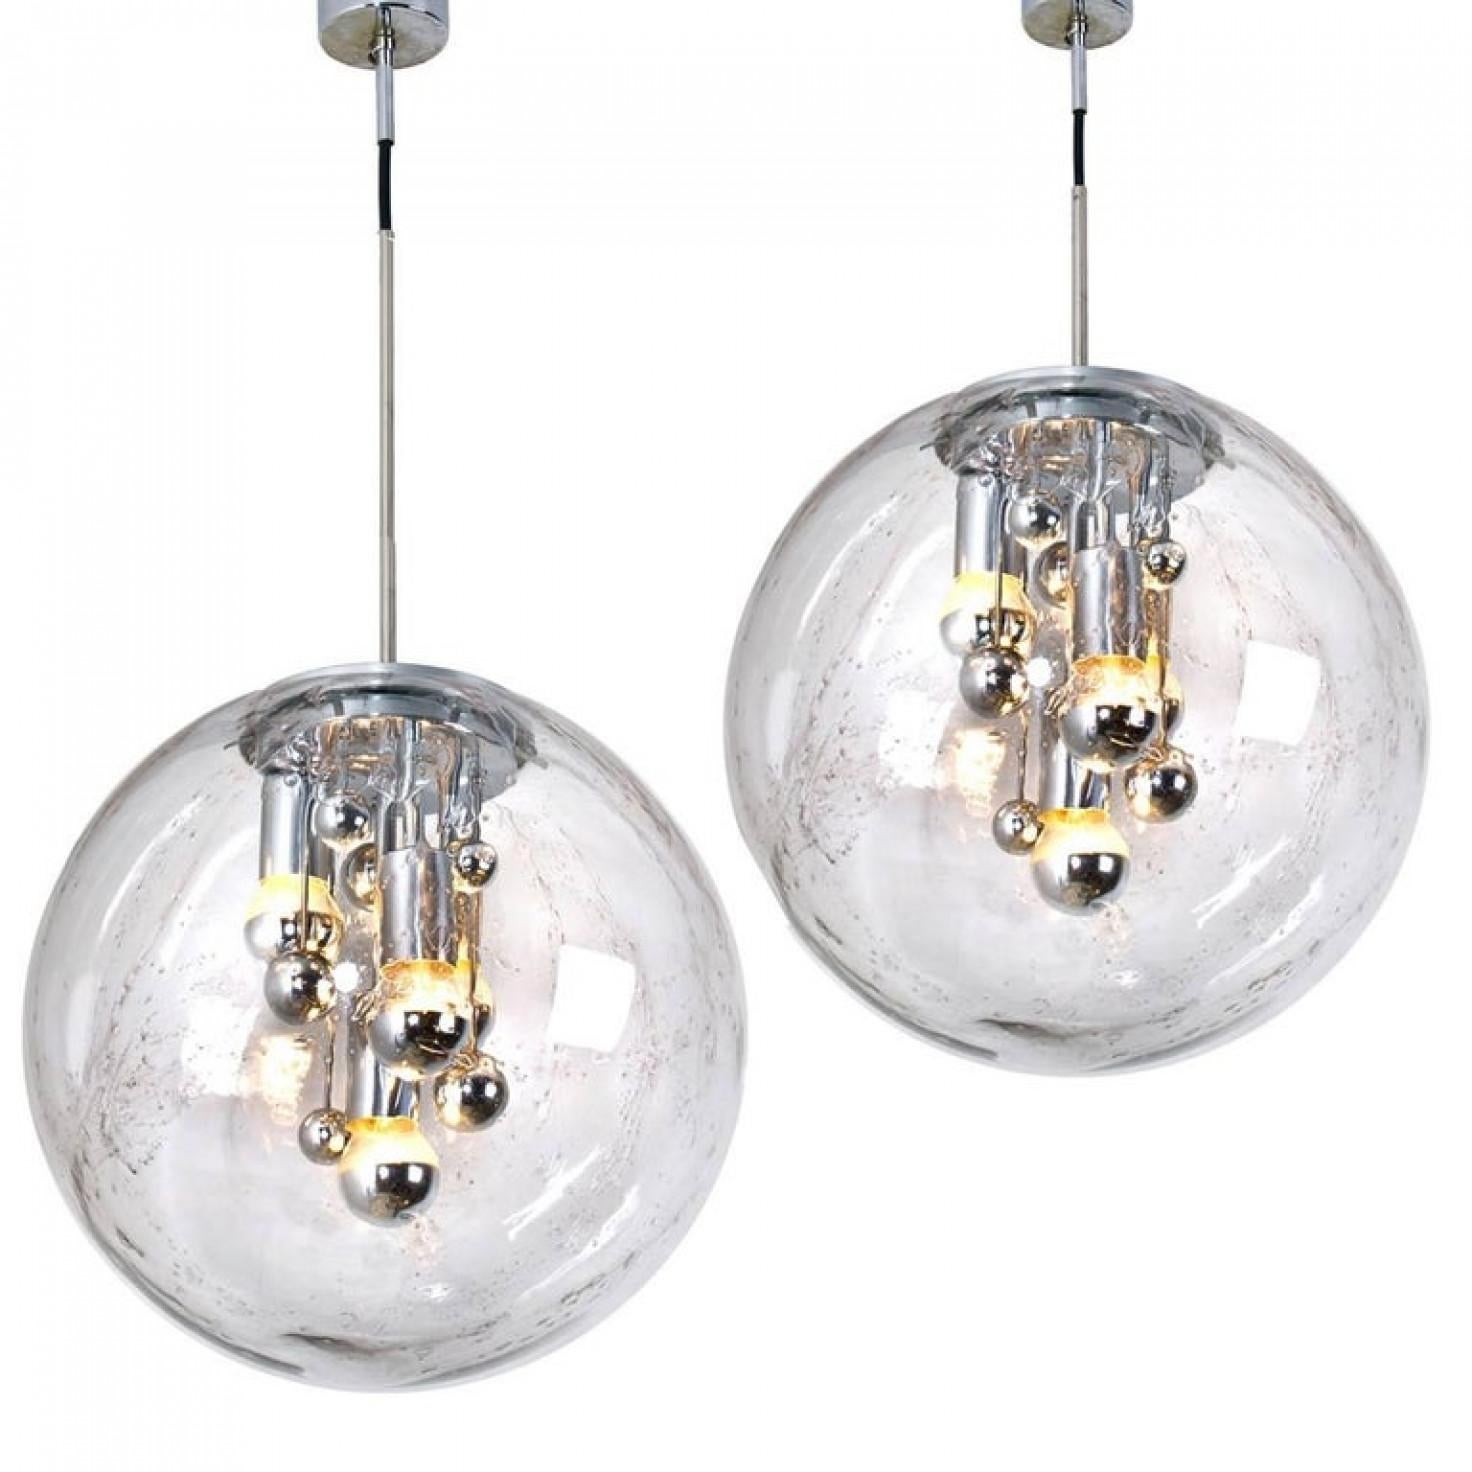 We offer an amazing and unique pair of large Space Age light fixture. The set was made by the German manufacturer Doria in the 1970s.

These heavy quality light sculptures not only function as light sources but also as a sculptural components. To